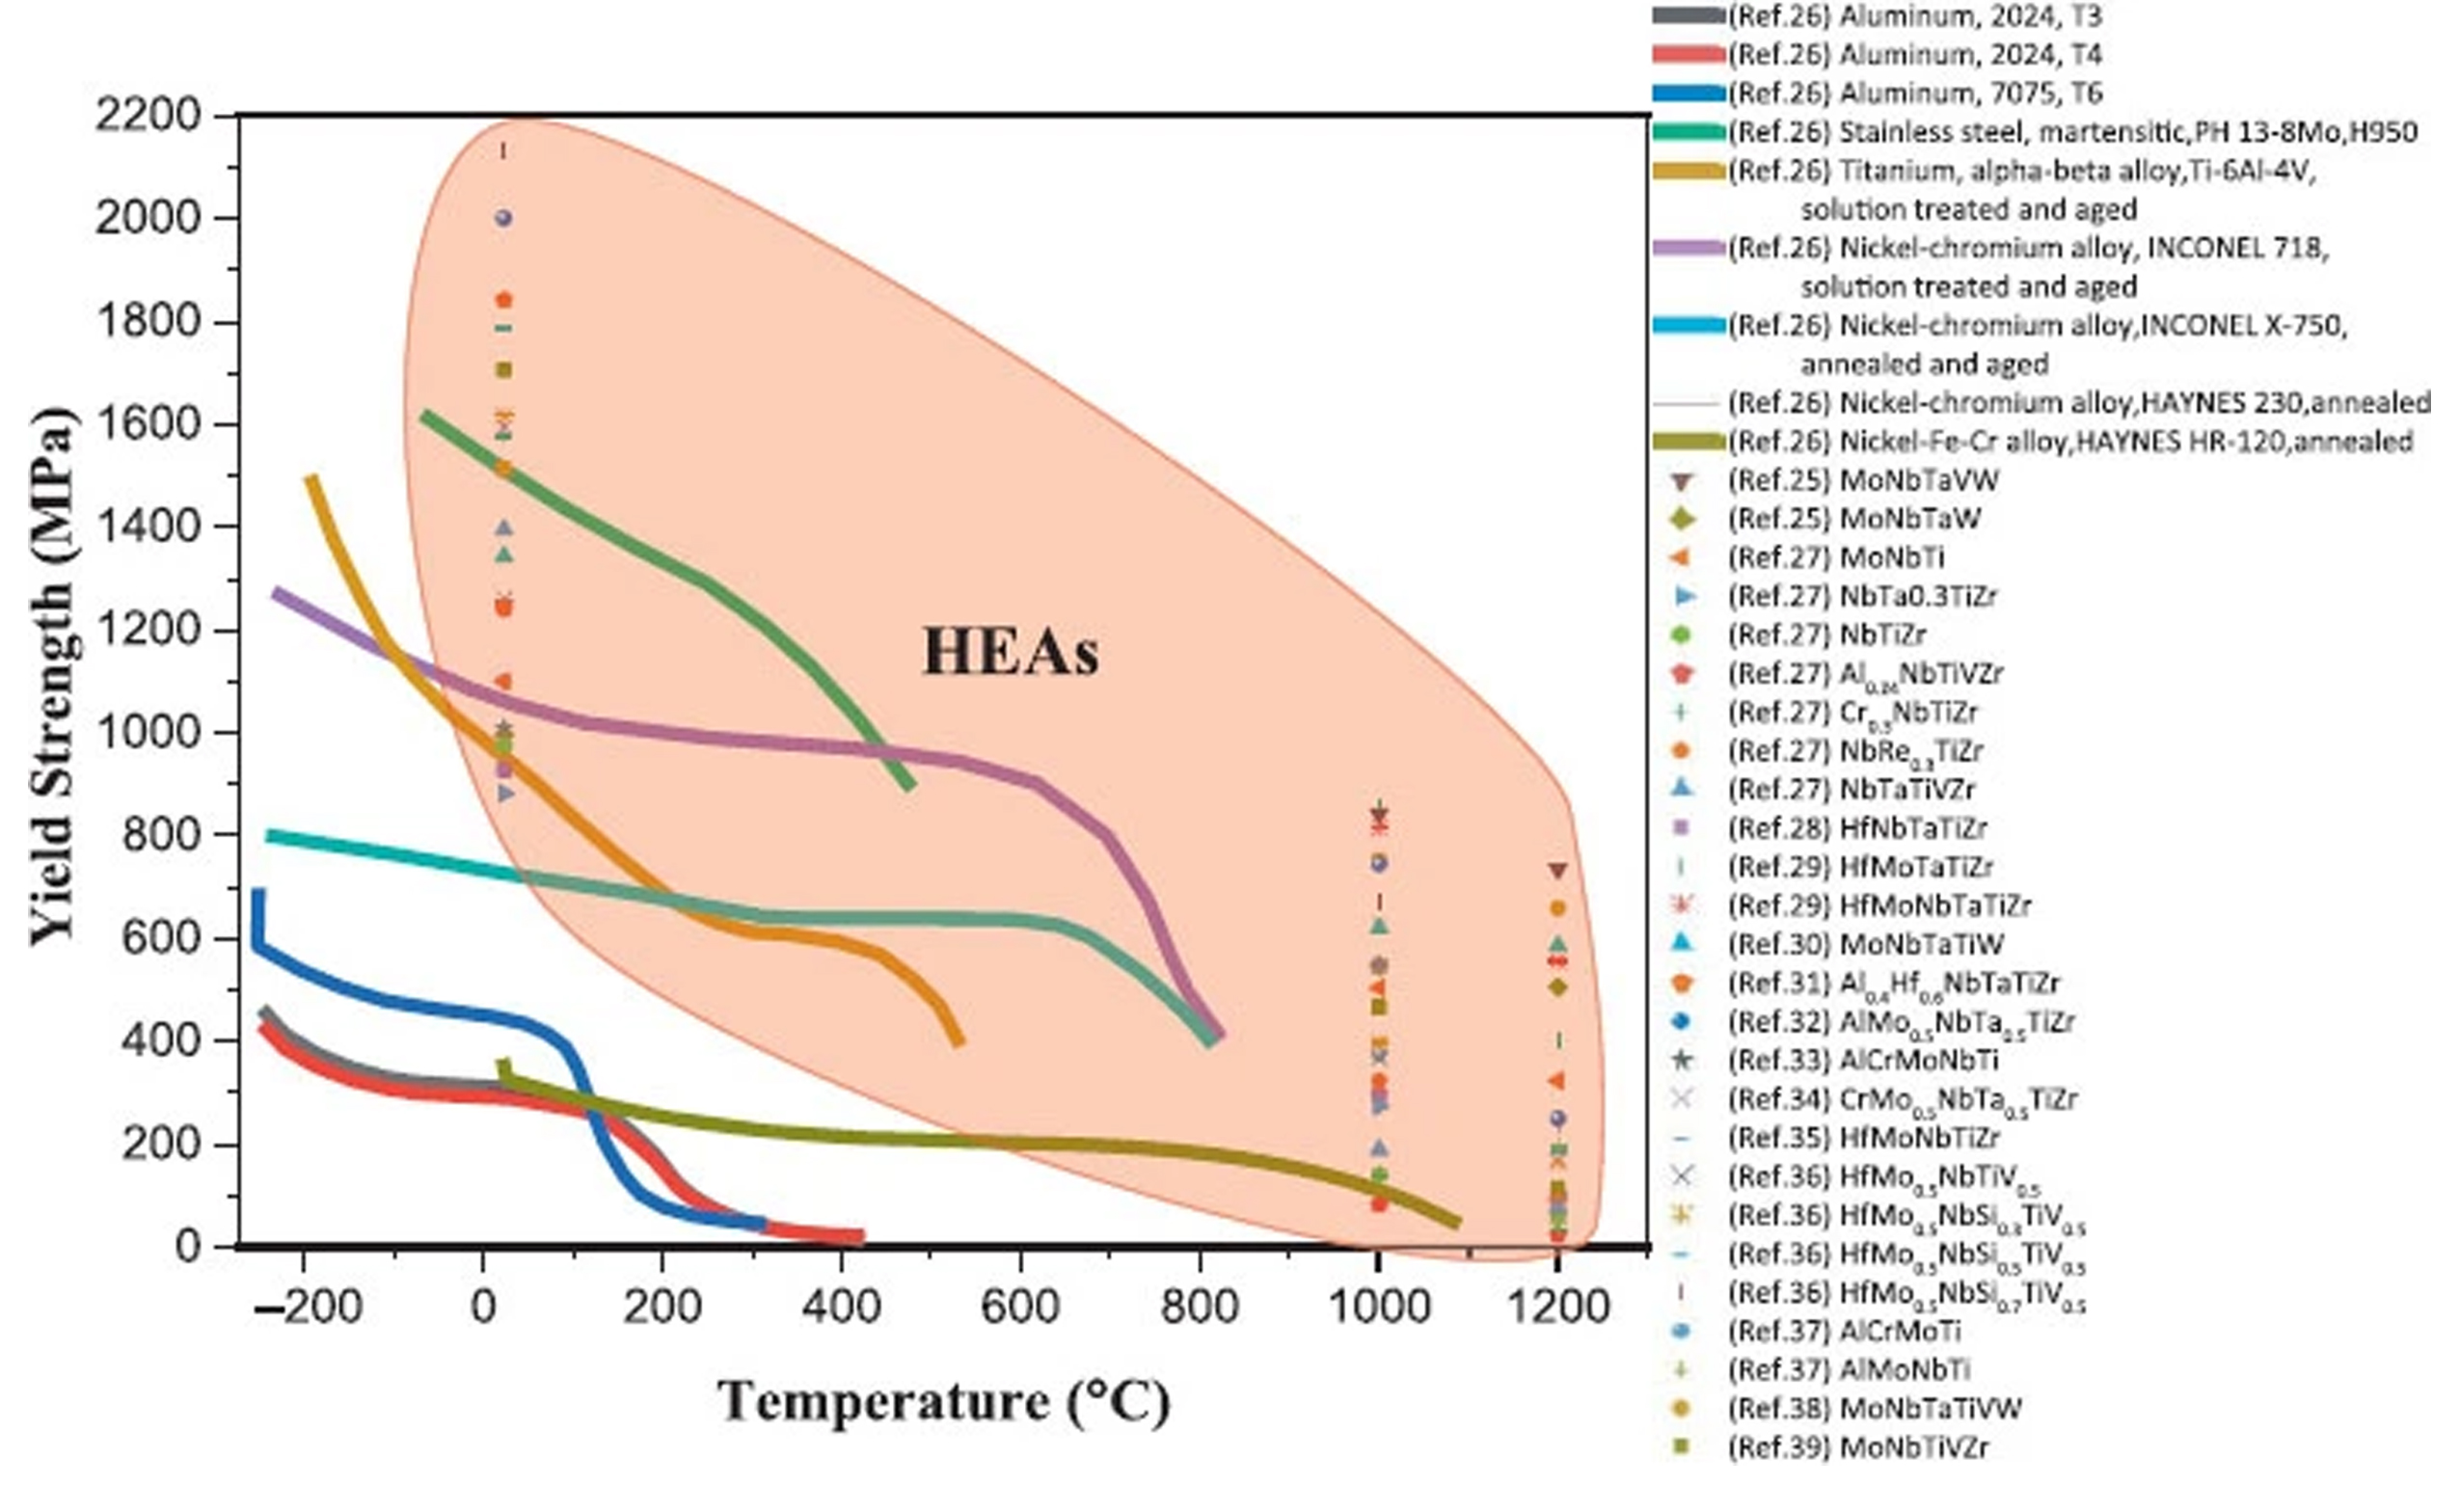 Heat and the impact on superalloys